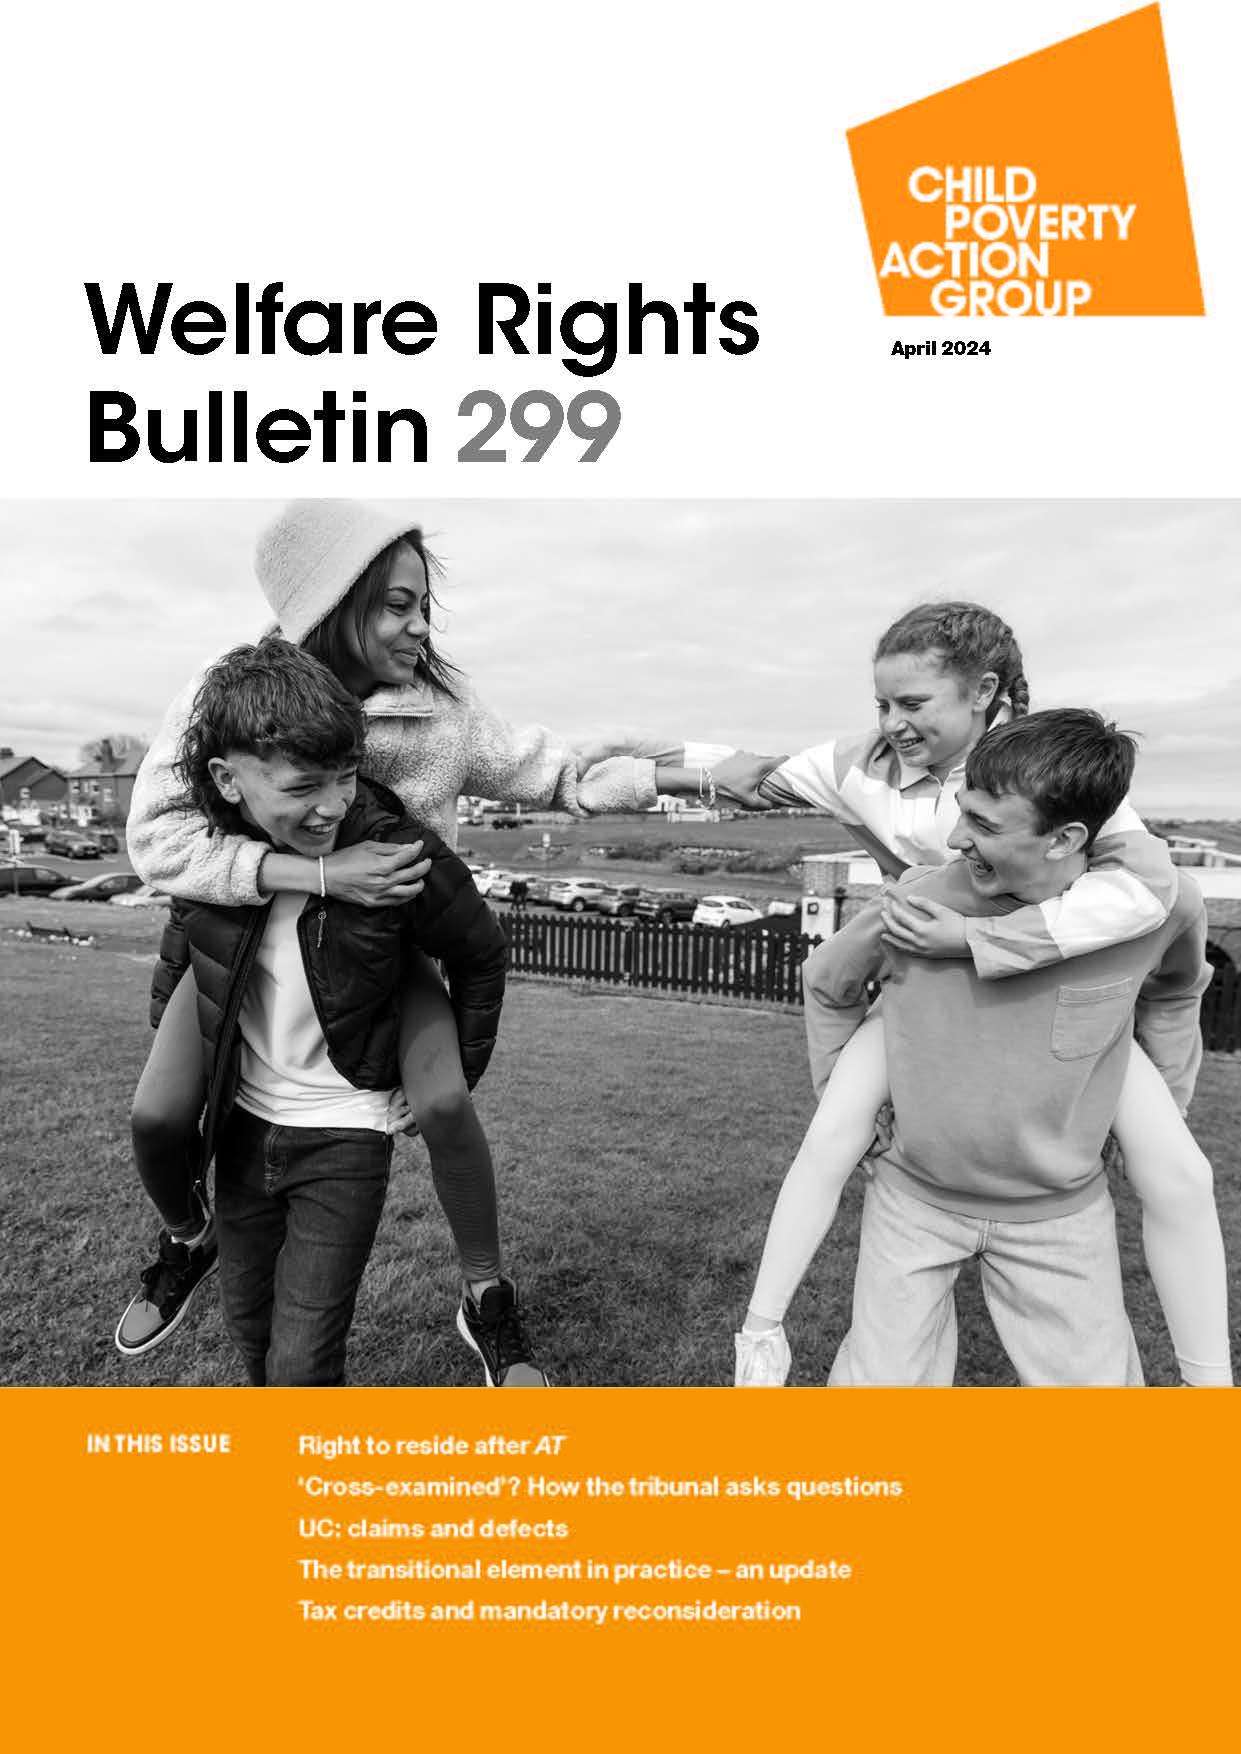 front cover image of April bulletin